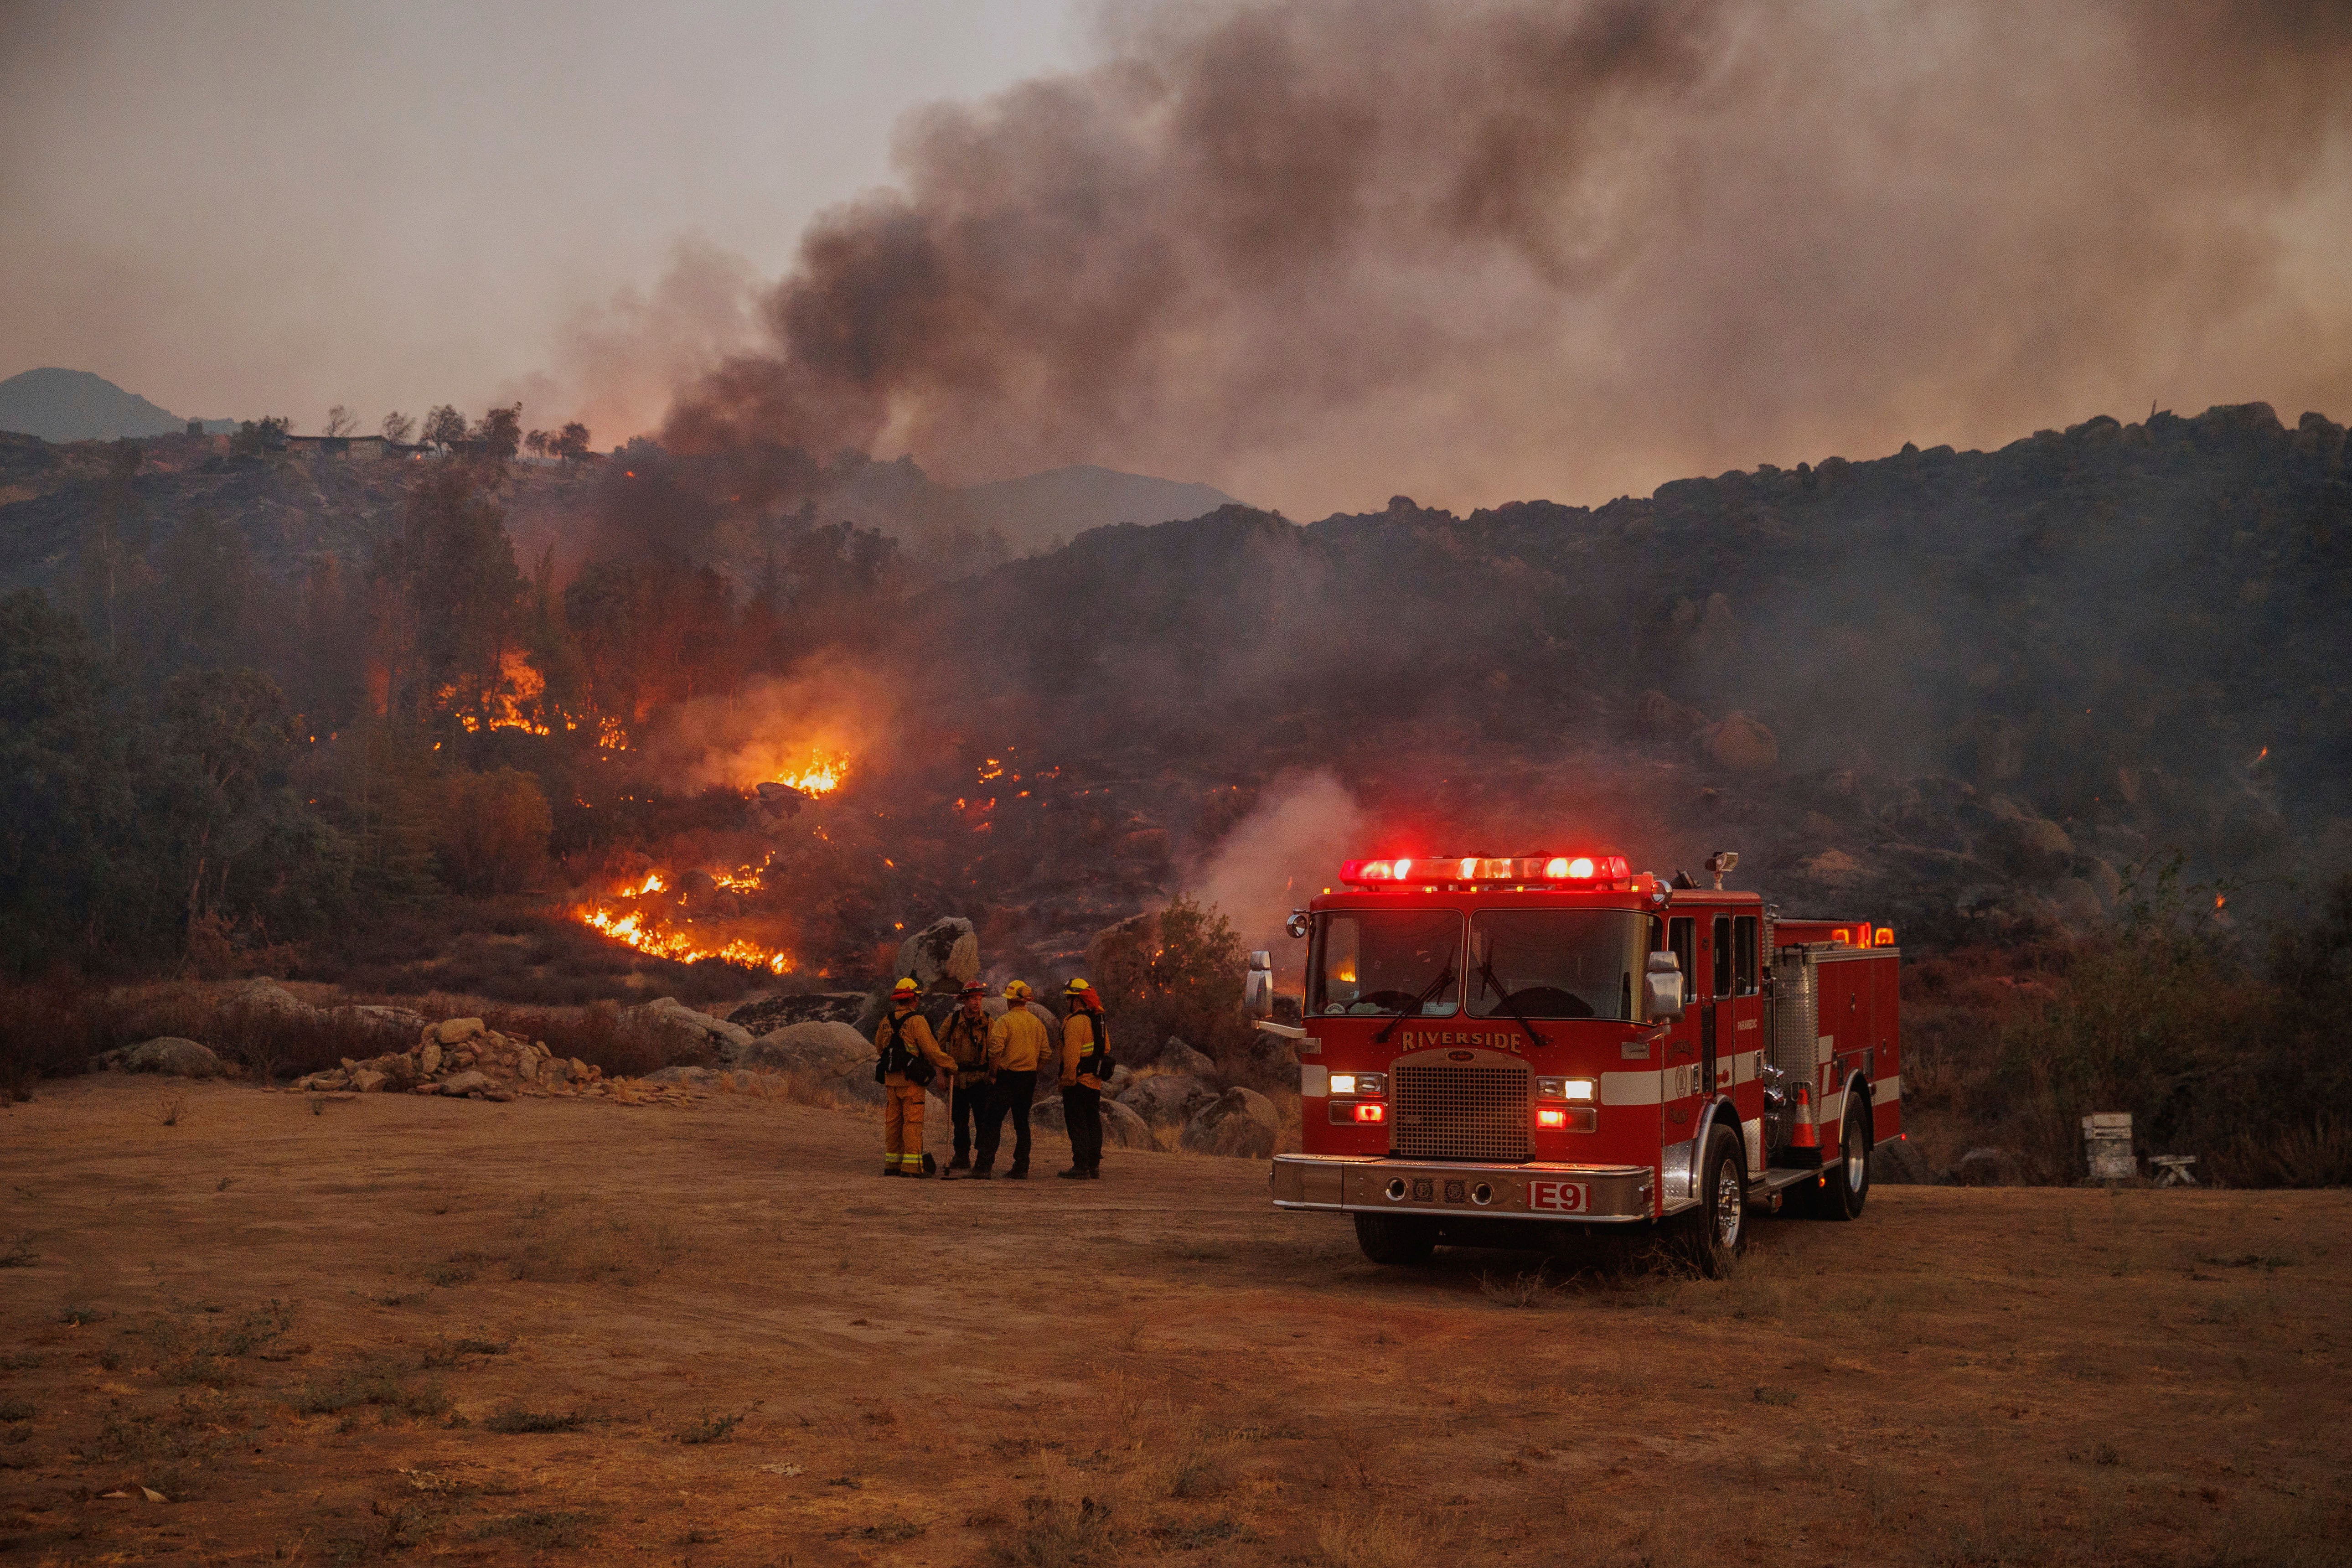 The Fairview Fire has now reached 2,400 acres